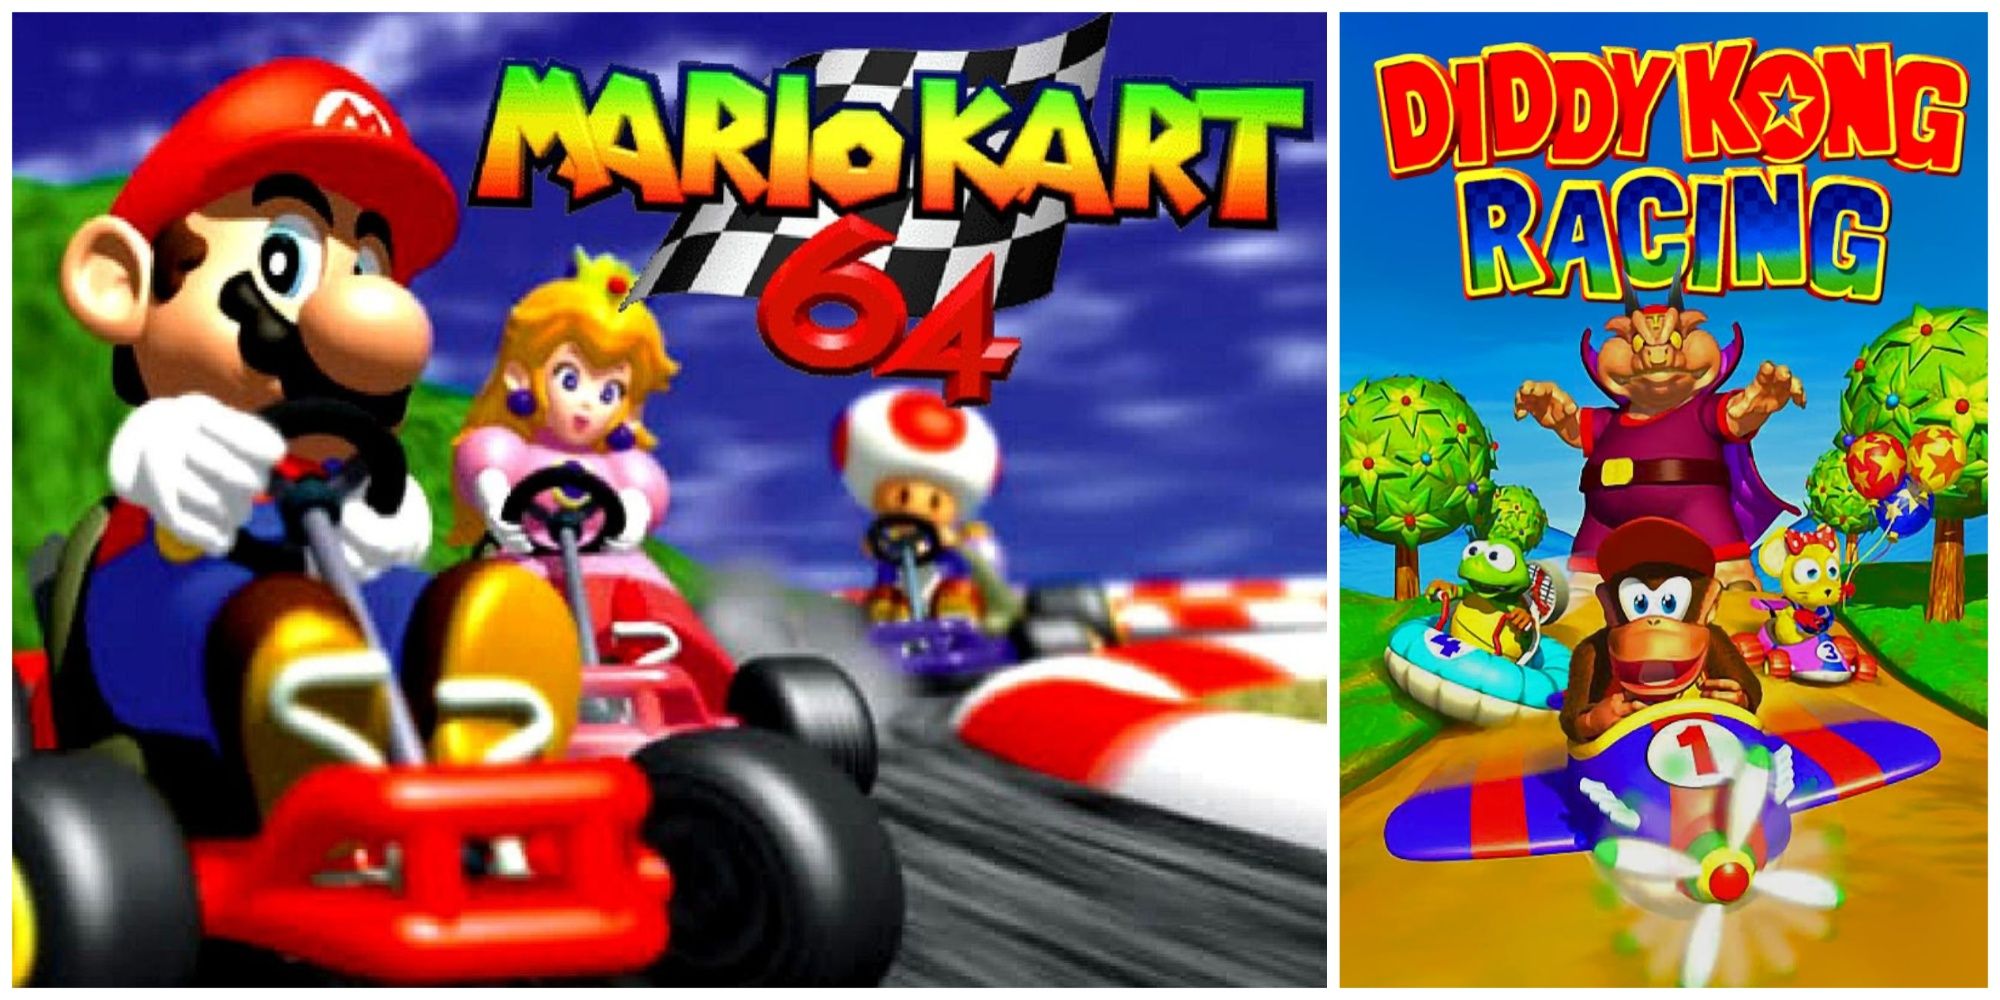 Collage featuring cover art: Nintendo 64 (left) and Diddy Kong Racing (right)